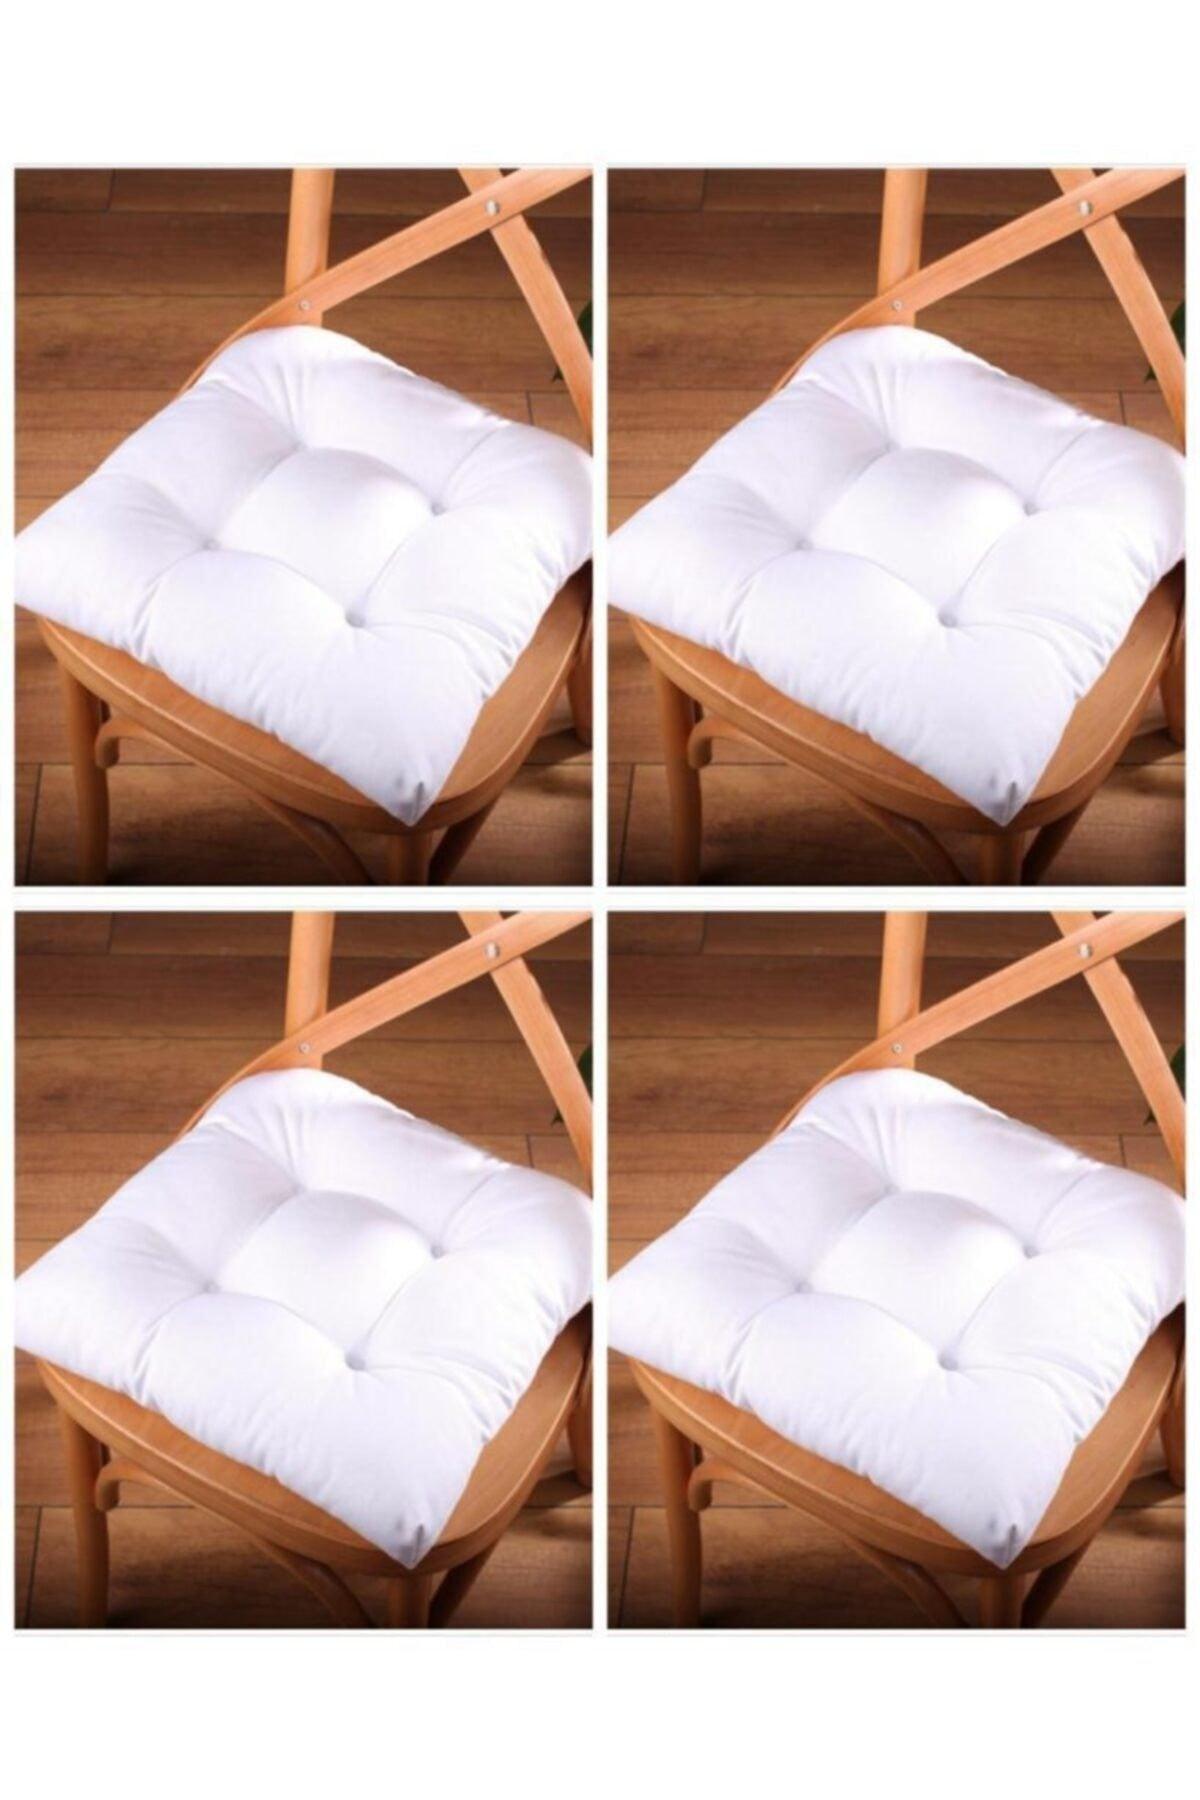 4 Pcs Lux Pofidik White Chair Cushion Special Stitched Laced 40x40cm - Swordslife